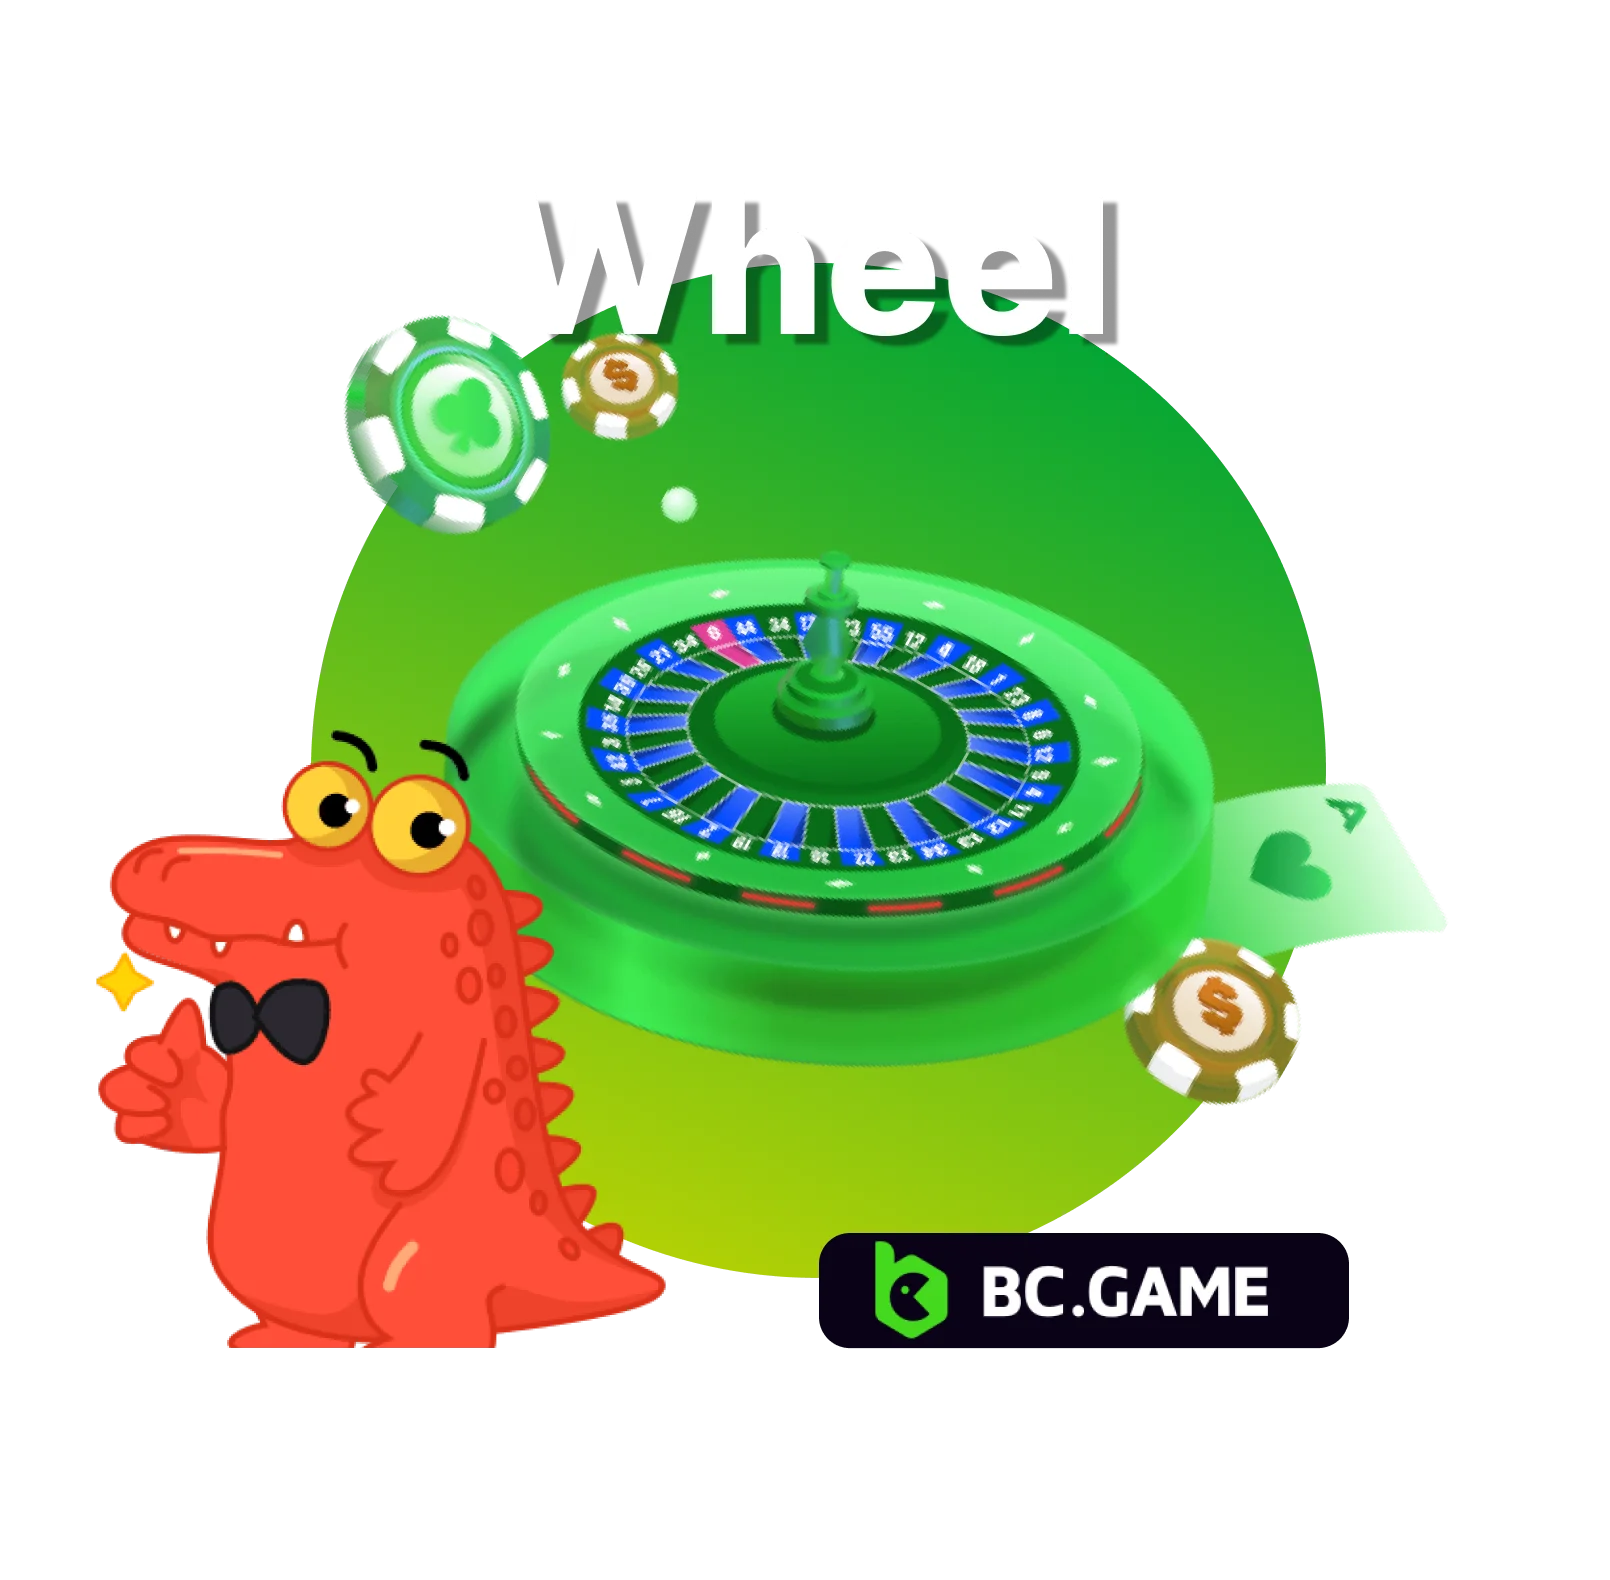 BC.Game Wheel, spin to win big prizes